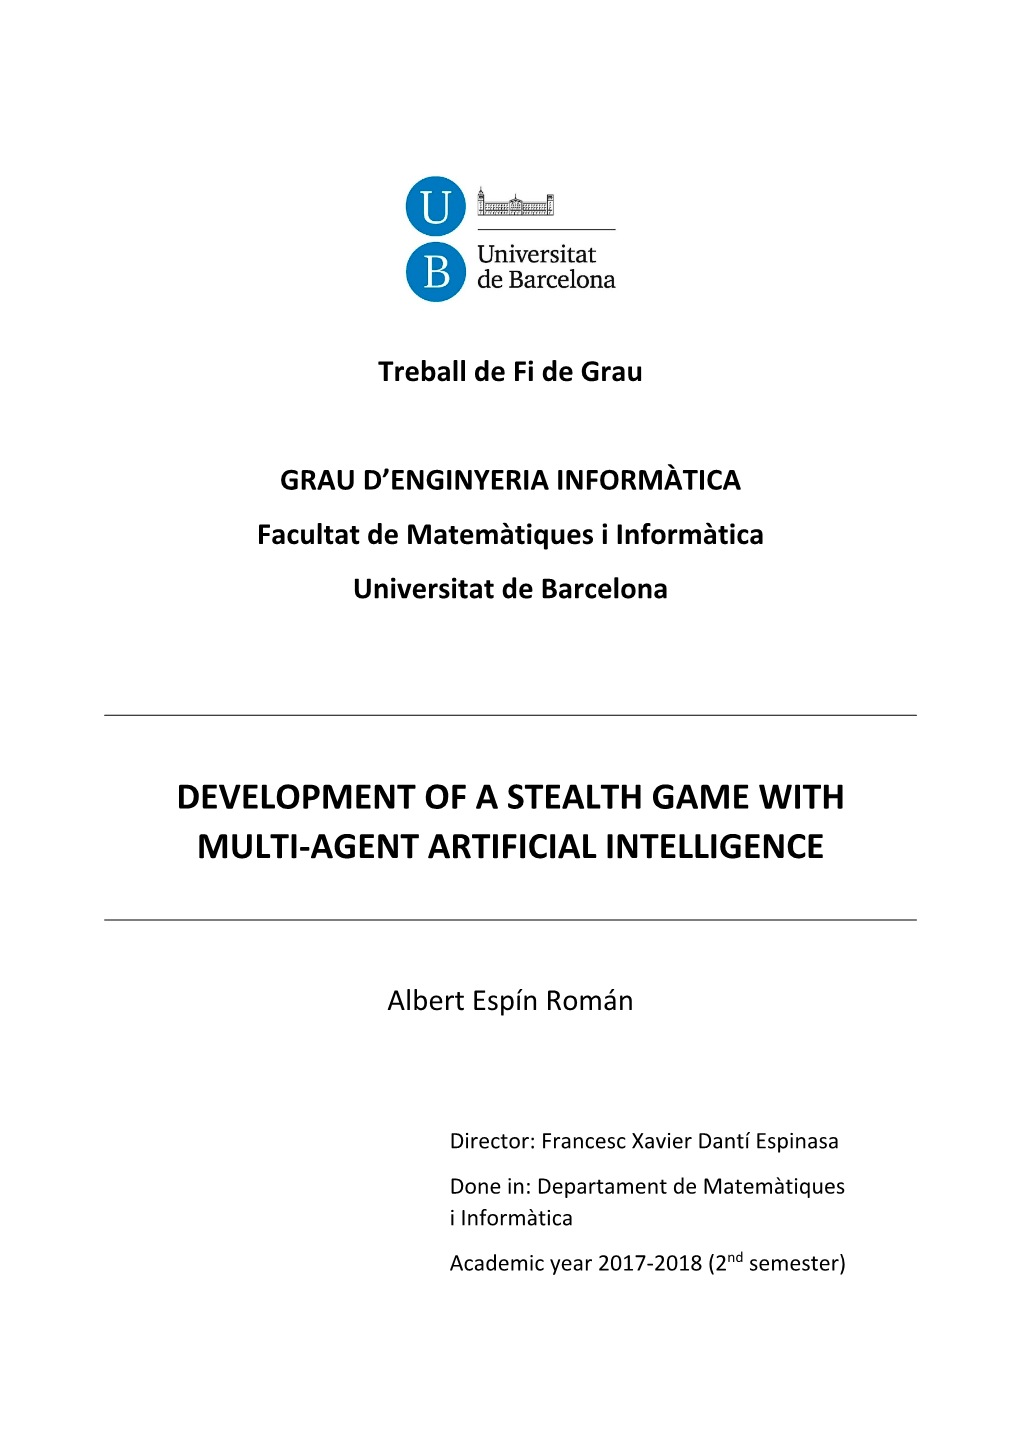 Development of a Stealth Game with Multi-Agent Artificial Intelligence